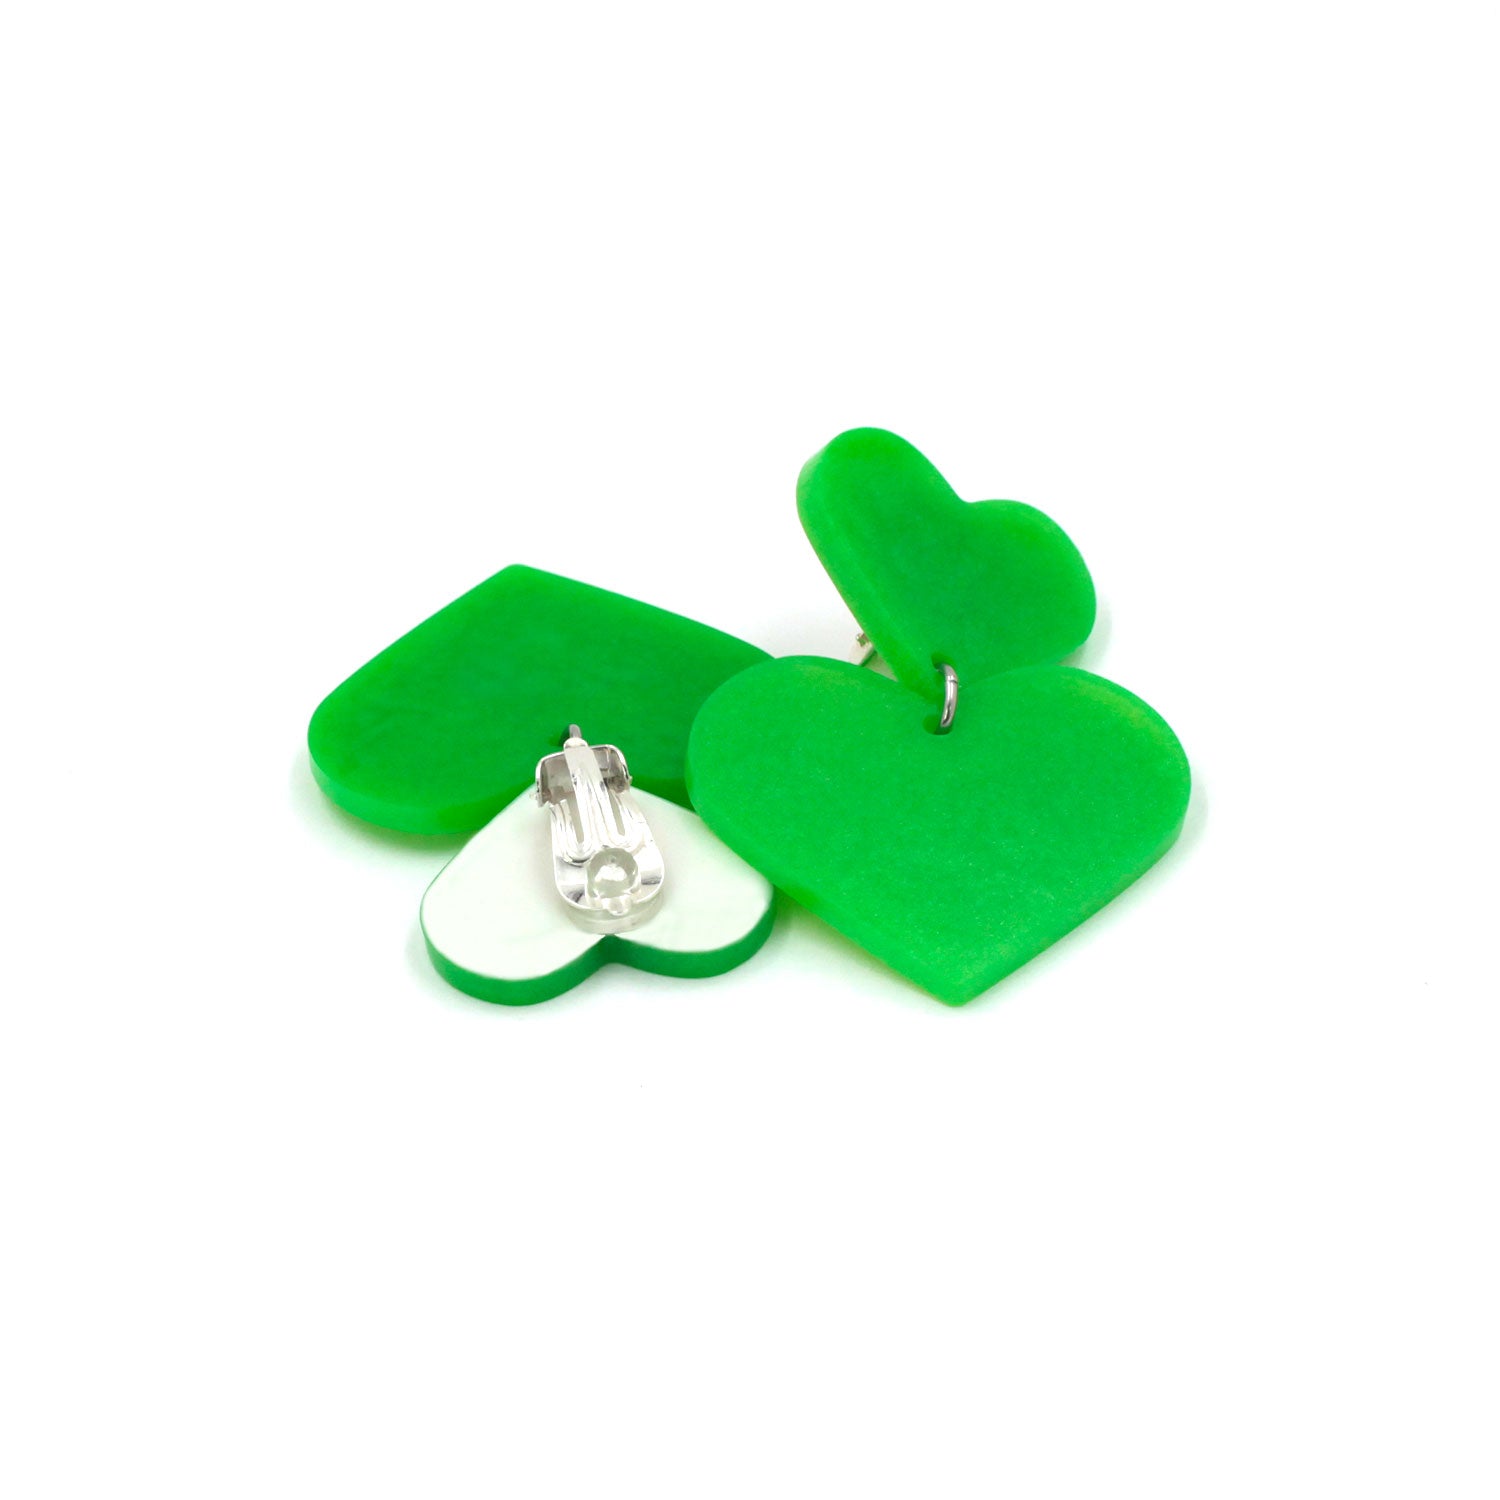 Four Leaf Clover Silicone Earring Back